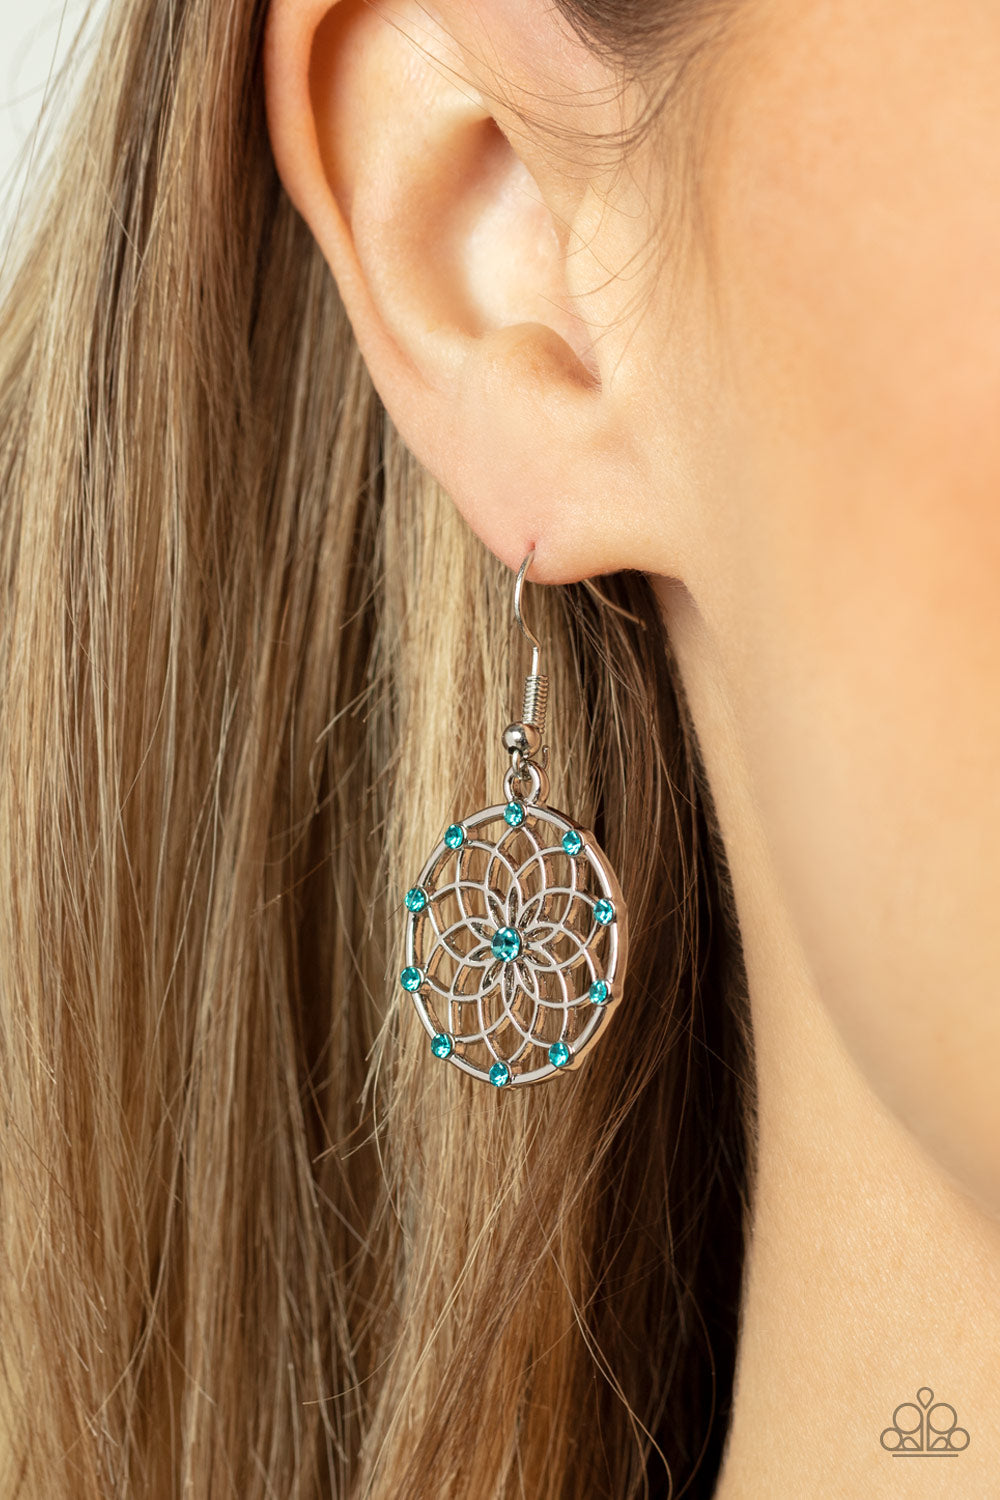 Springtime Salutations - Blue and Silver Earrings - Paparazzi Accessories - Dotted with dainty blue rhinestones, an airy mandala-like blossom blooms inside a silver hoop for a seasonal shimmer. Earring attaches to a standard fishhook fitting. 